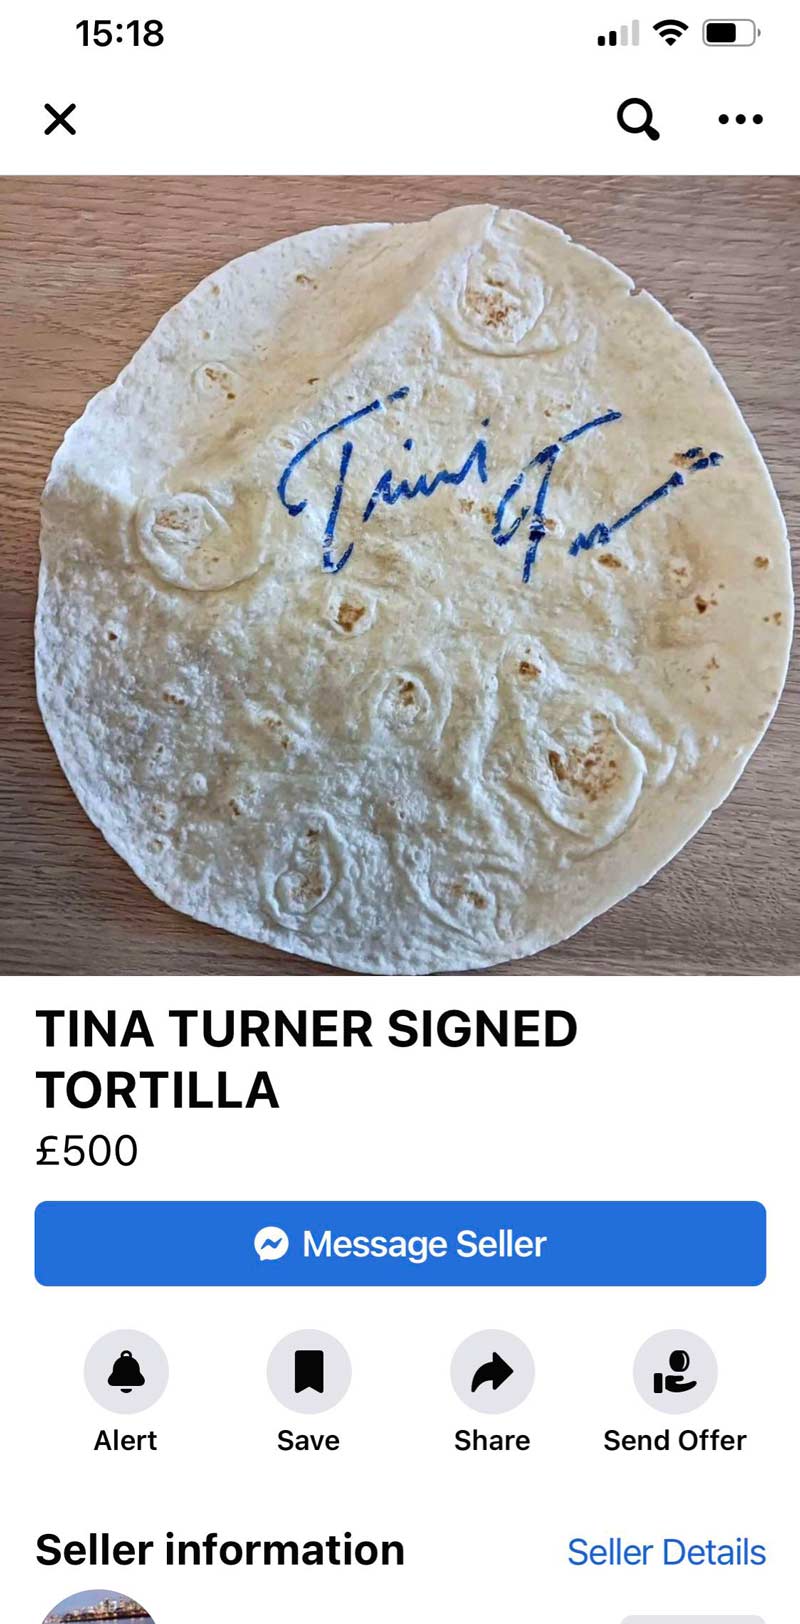 Forget Jesus in a slice of toast, you can have Tina Turner on a tortilla